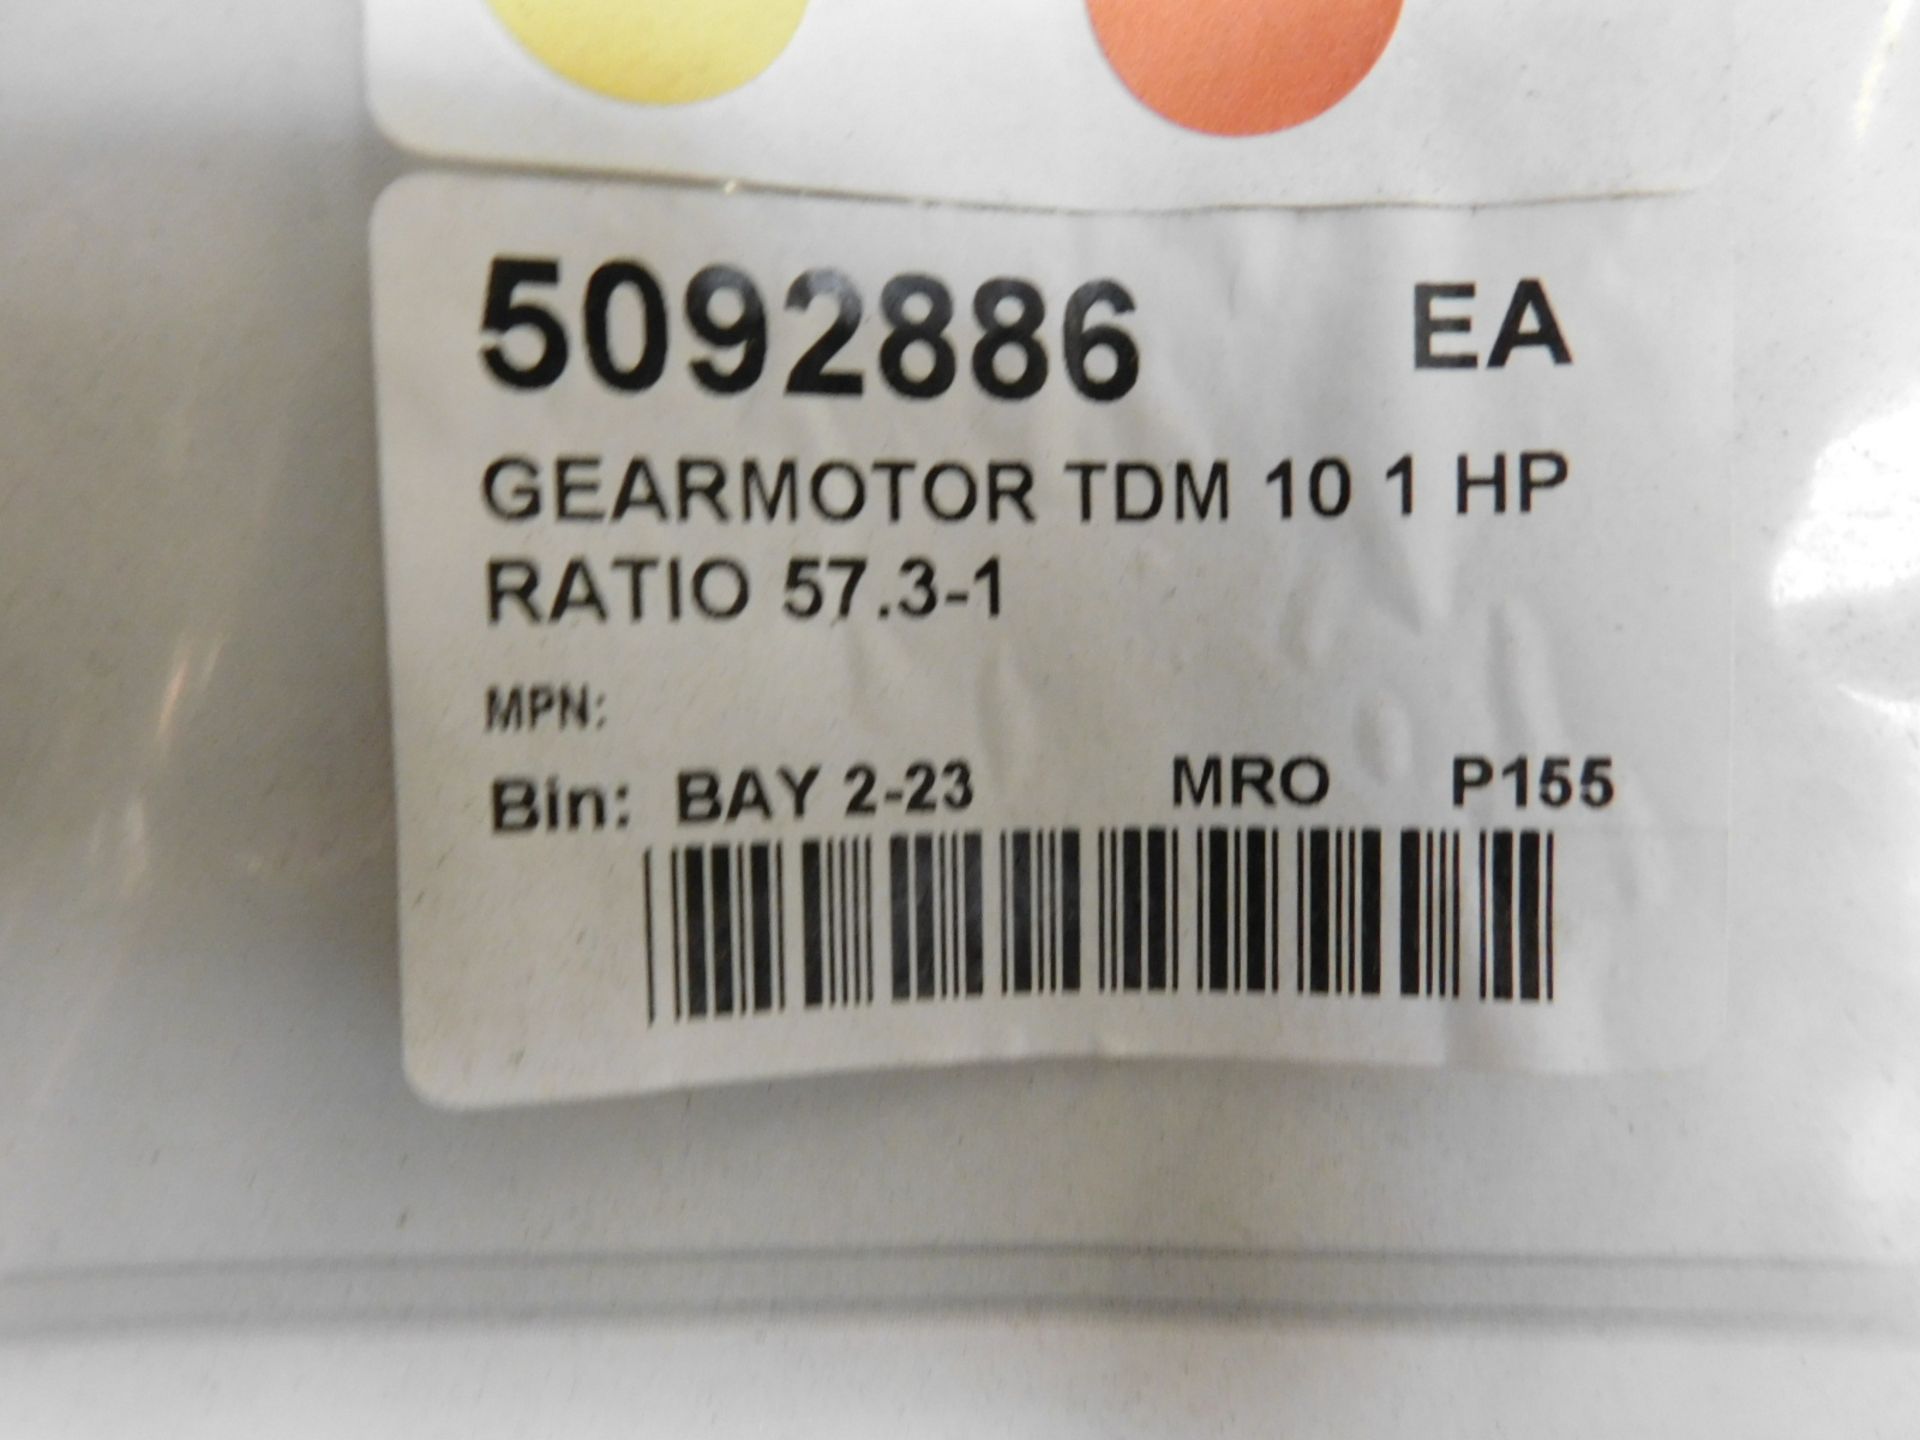 GEARMOTOR TDM10, 1 HP, RATIO 57.3-1, S/N: N/A (DELAYED PICKUP - FEBRUARY 15, 2021) - Image 2 of 3